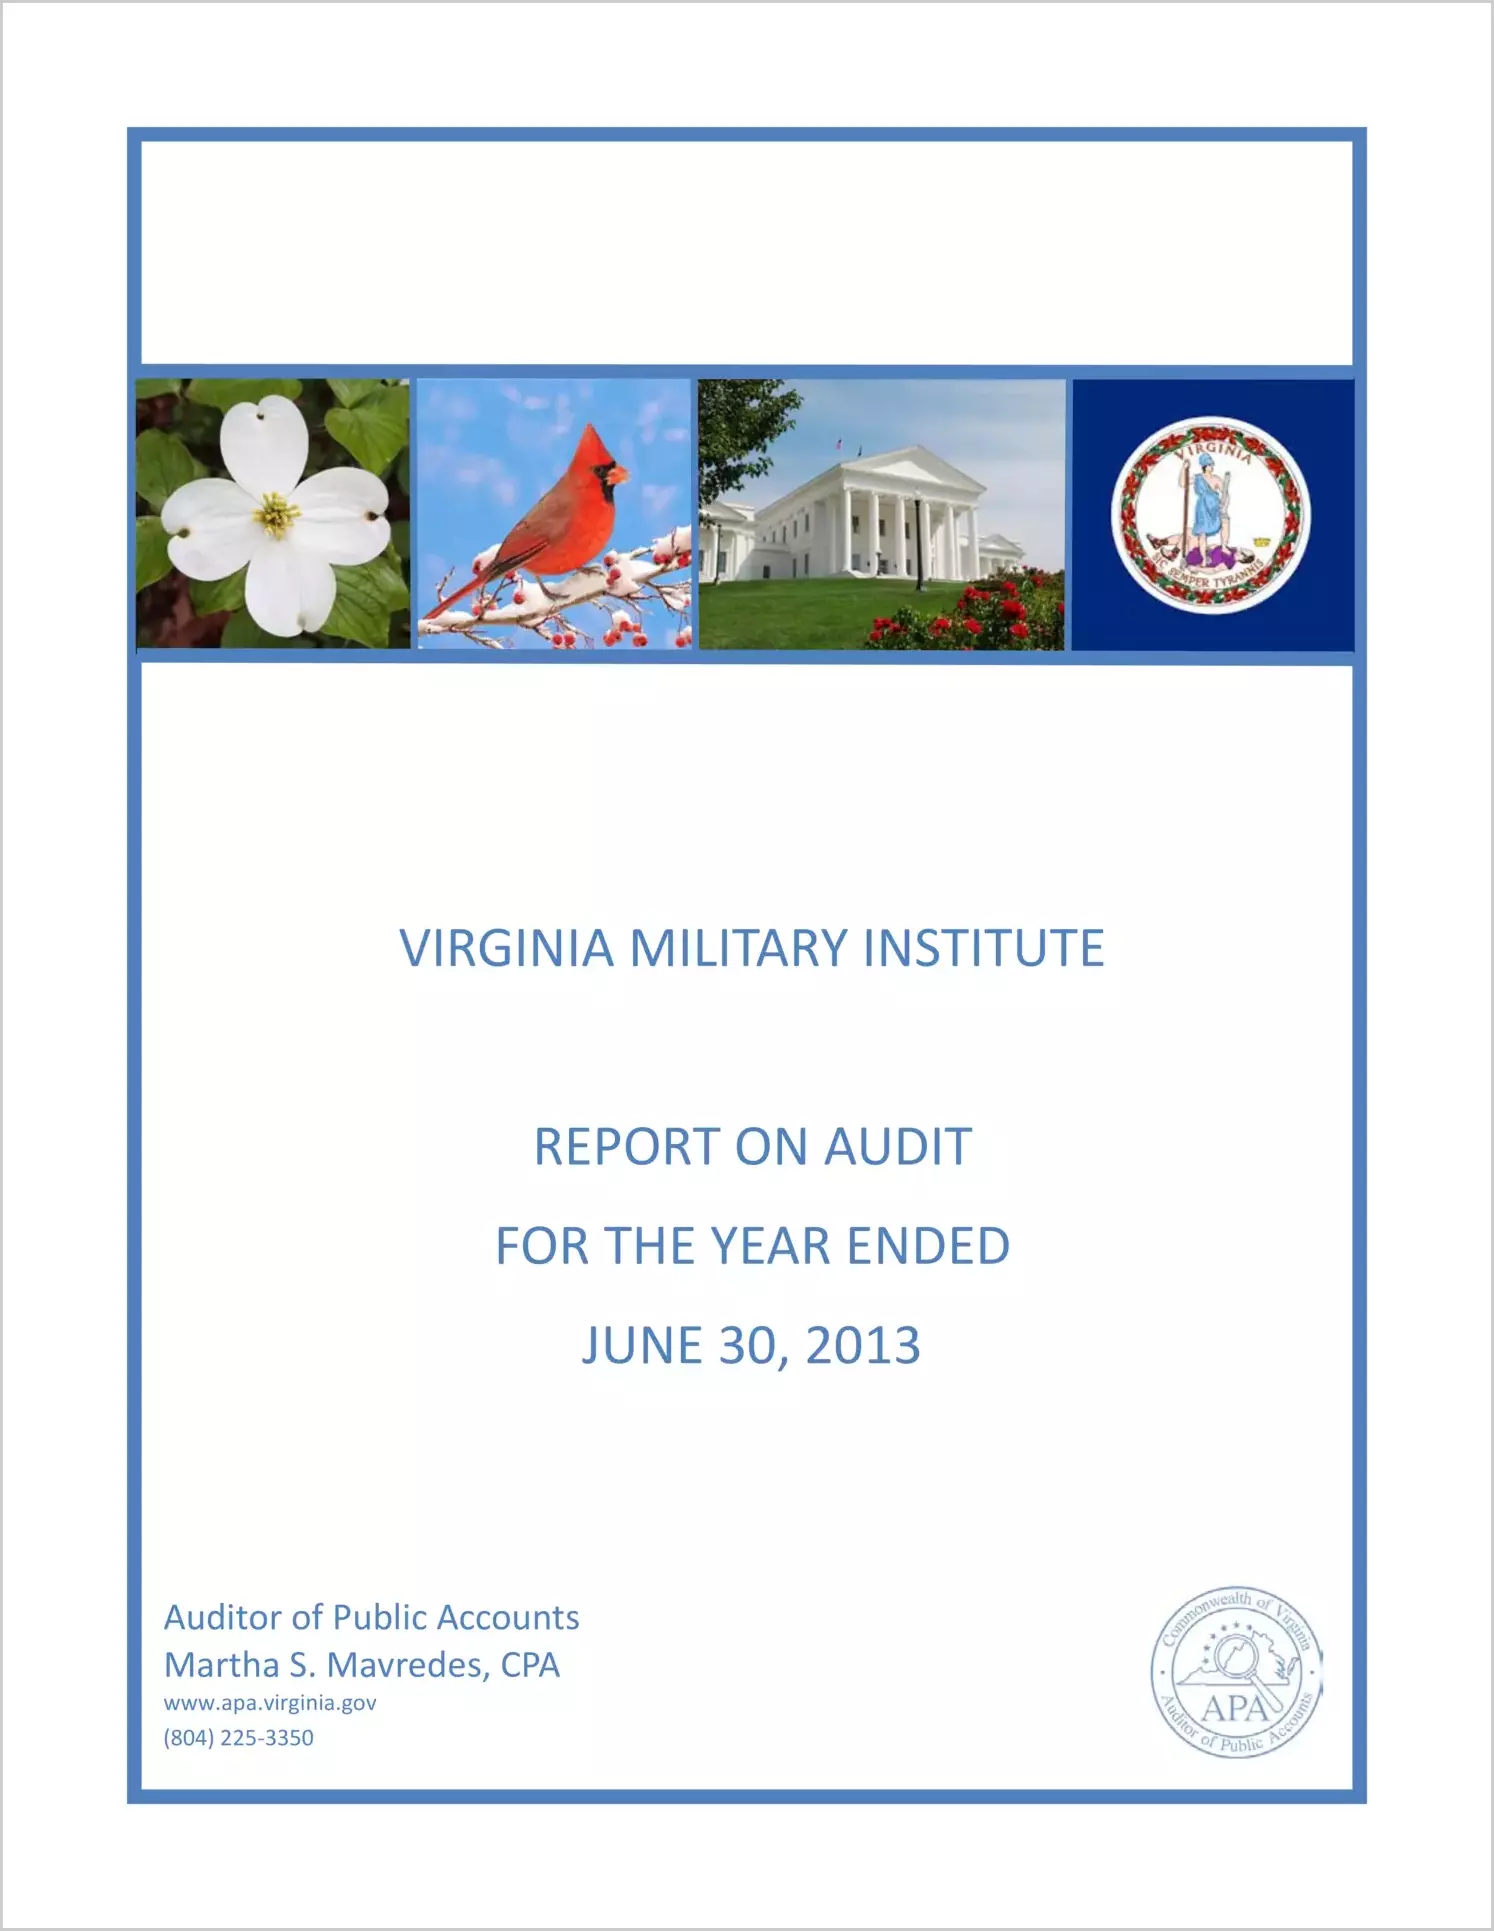 Virginia Military Institute for the year ended June 30, 2013